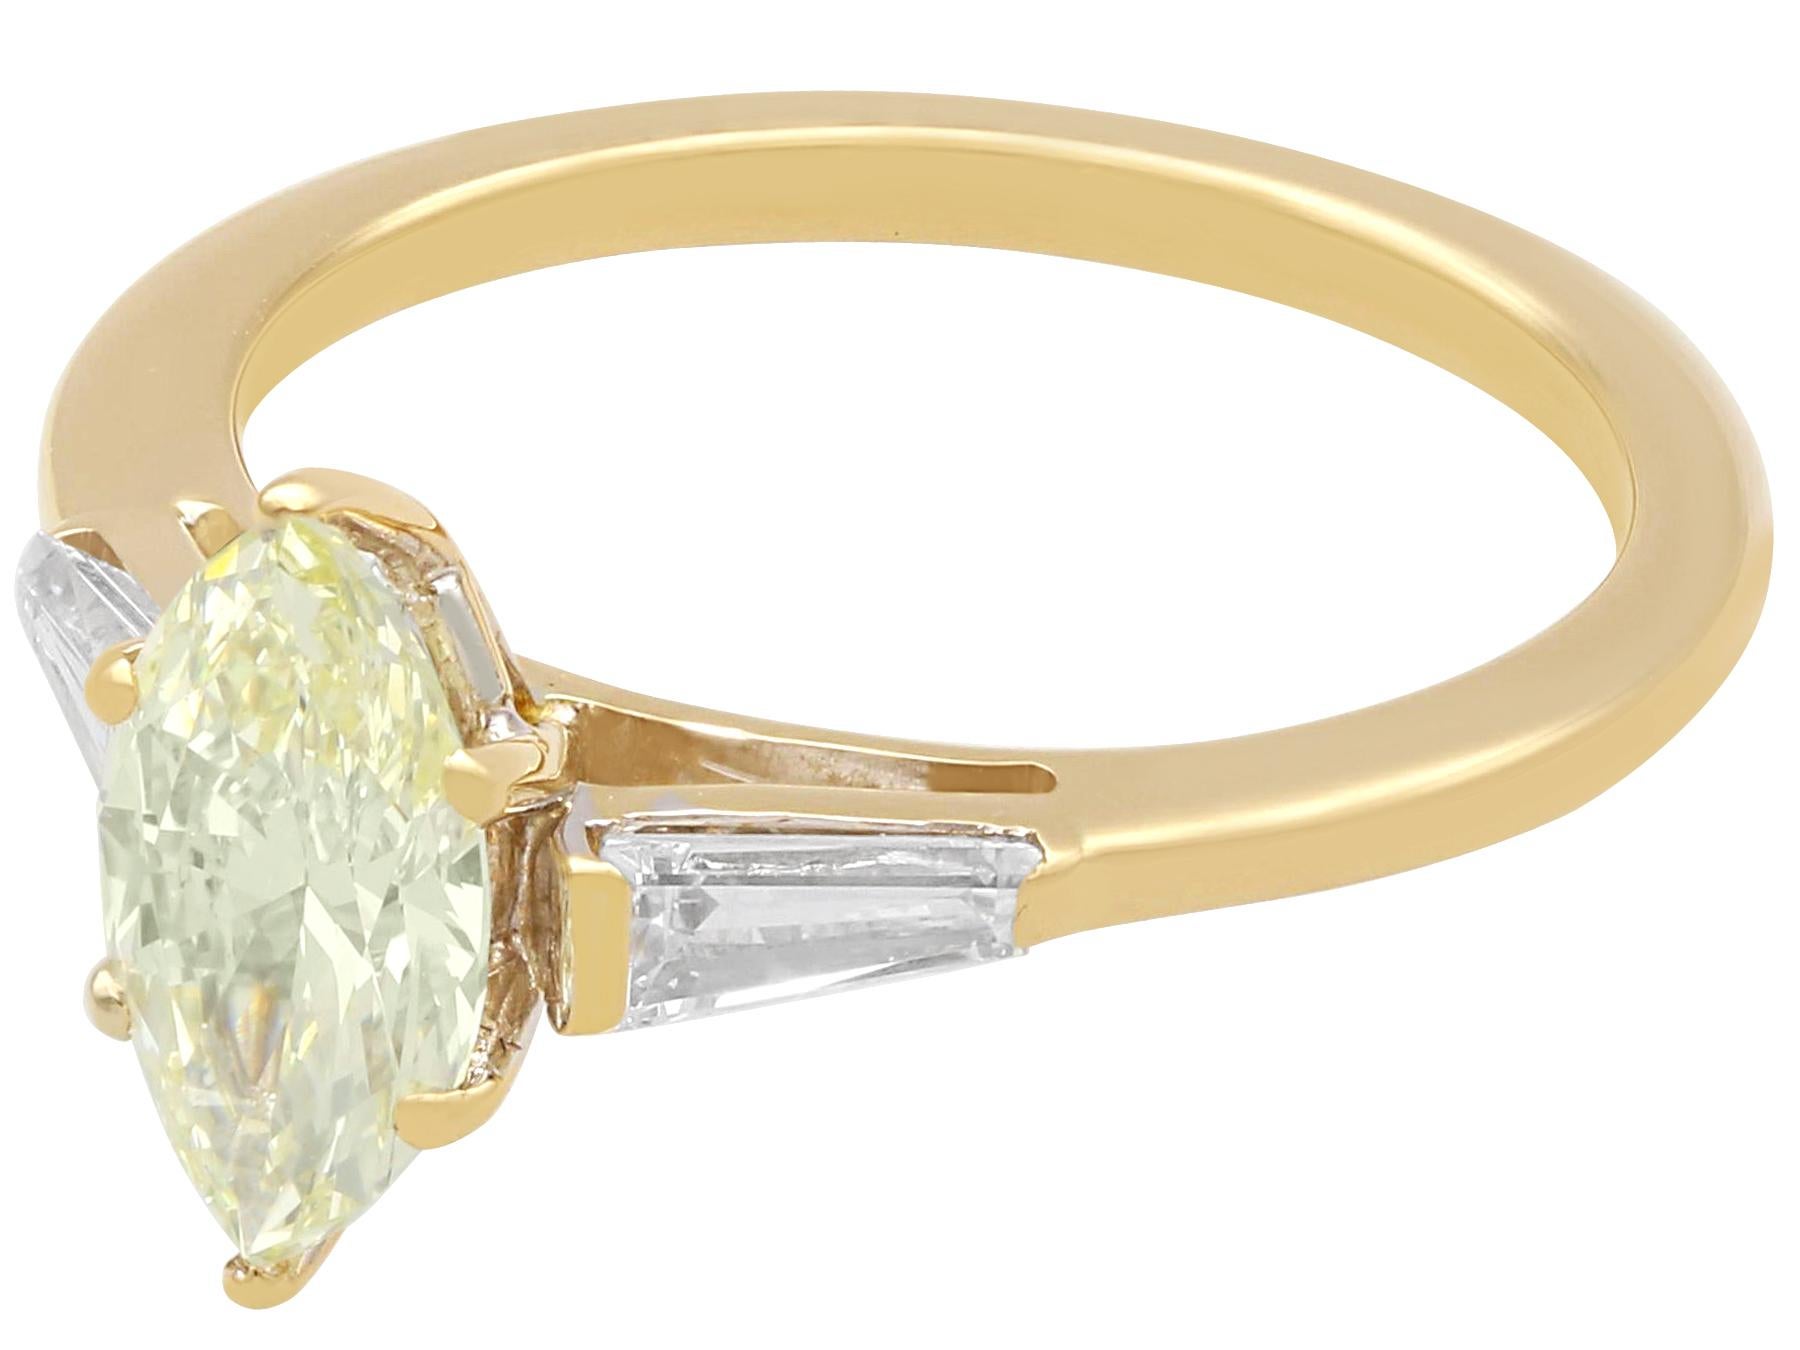 A stunning, fine and impressive 1.36 carat light yellow marquise diamond and 18 karat yellow gold solitaire ring; part of our diverse range of diamond jewelry.

This stunning contemporary engagement ring has been crafted in 18k yellow gold.

The